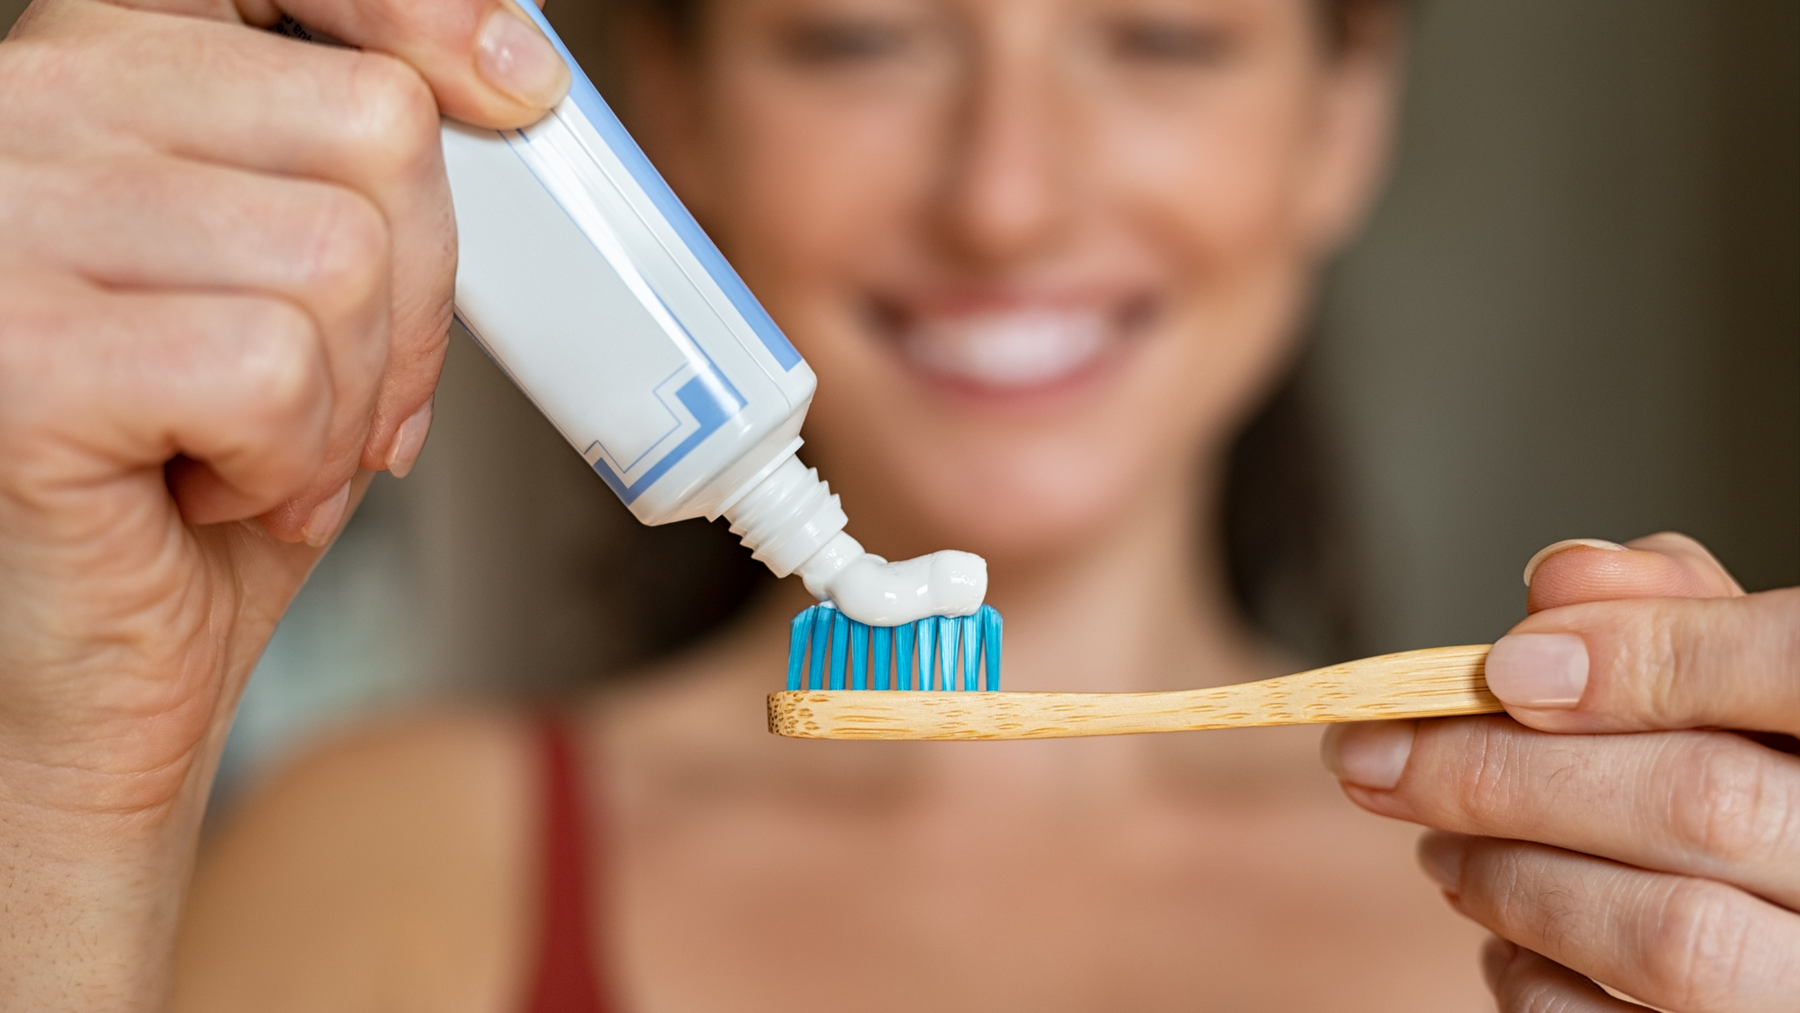 4 Simple Questions You Can Ask About Dental Hygiene